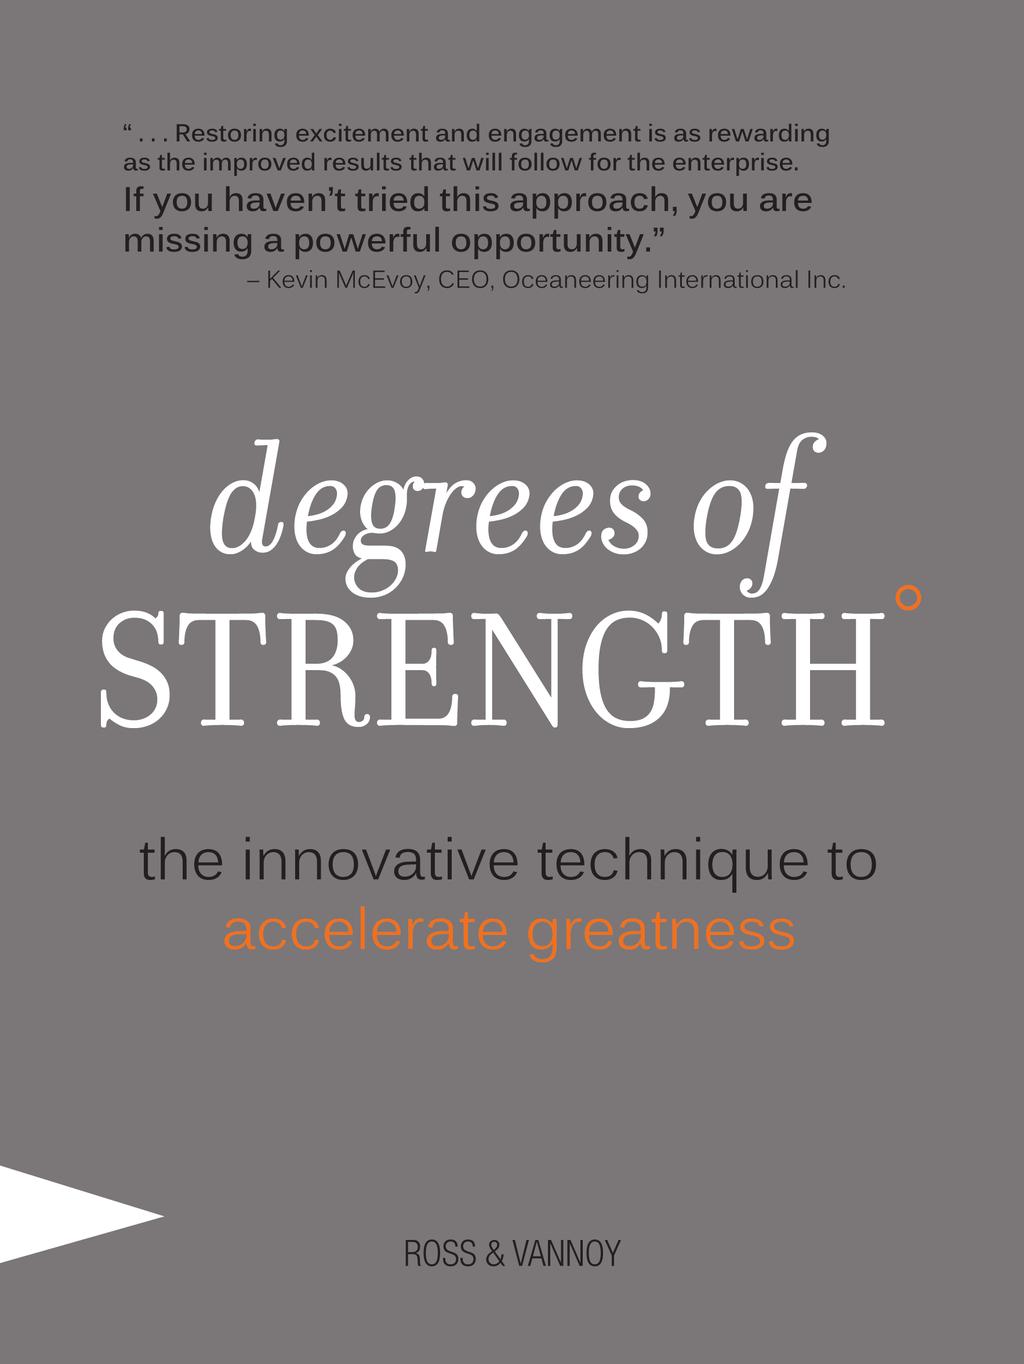 Degrees of Strength Team Acceleration Guide www.